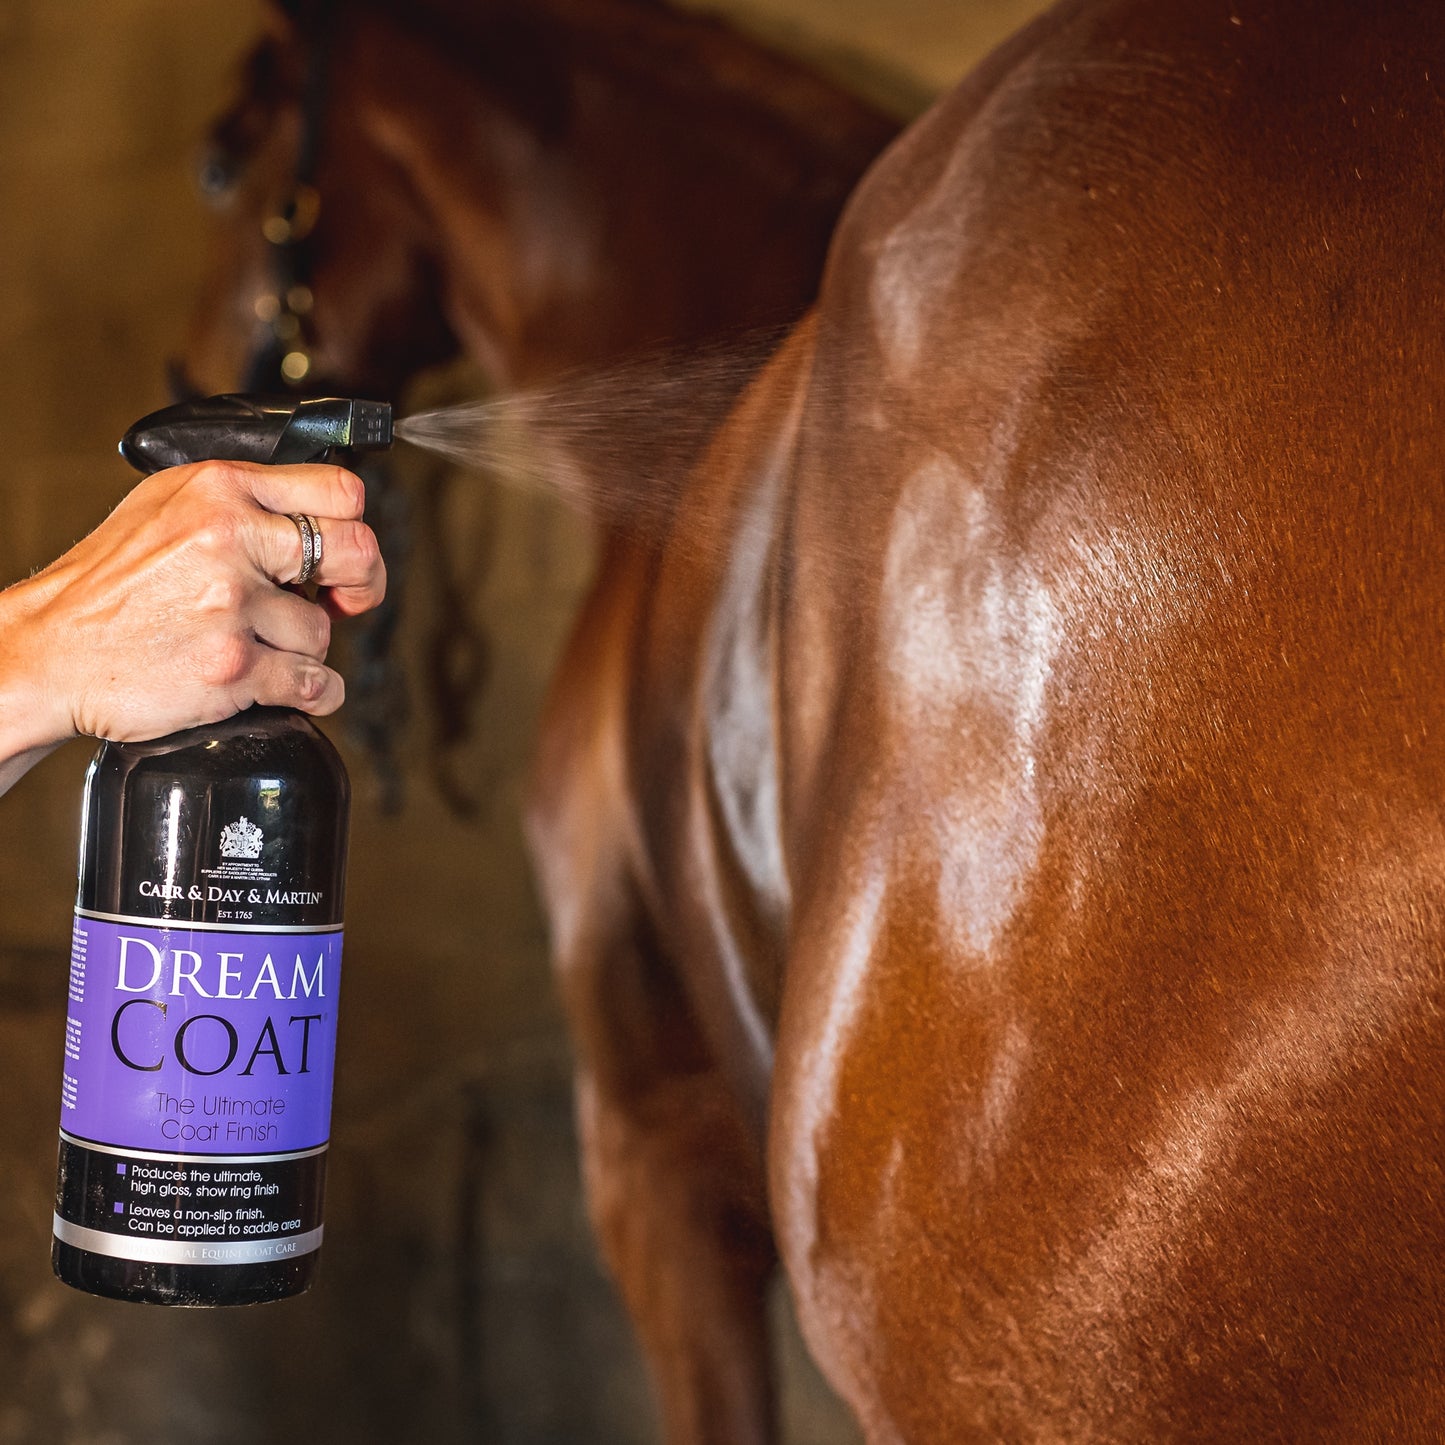 Dream Coat Spray being applied to a horse